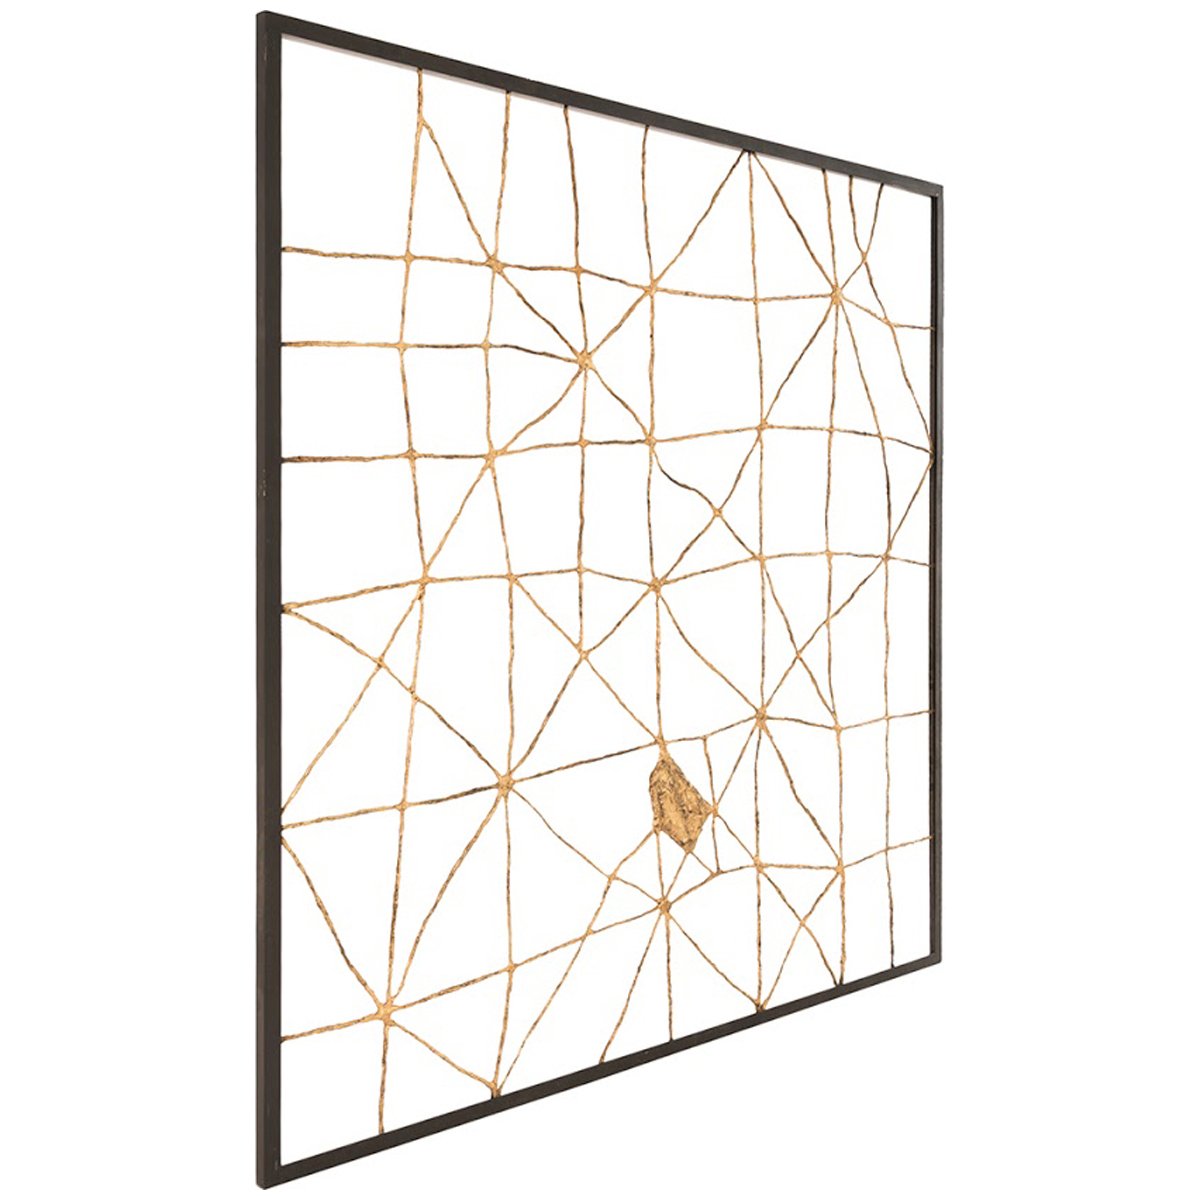 Phillips Collection Mesh Wall Art